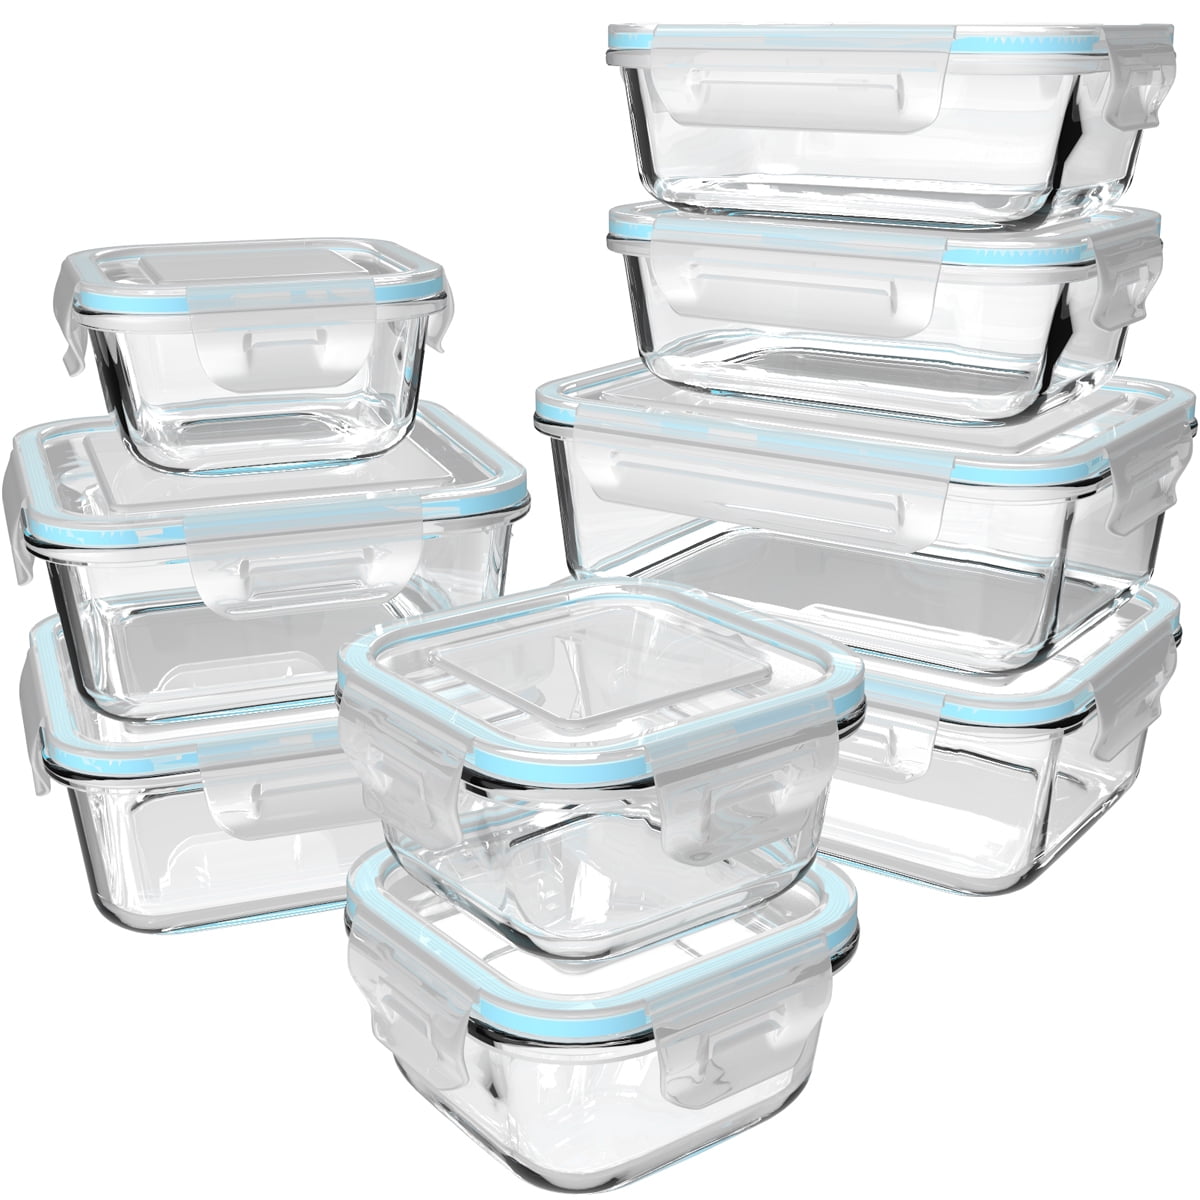 Pyrex 3-Cup Single Rectangular Food Storage Container with Lid, Non-Toxic,  BPA-Free Lid, Tempered Non-Pourous Glass, Microwave, Dishwasher, Freezer